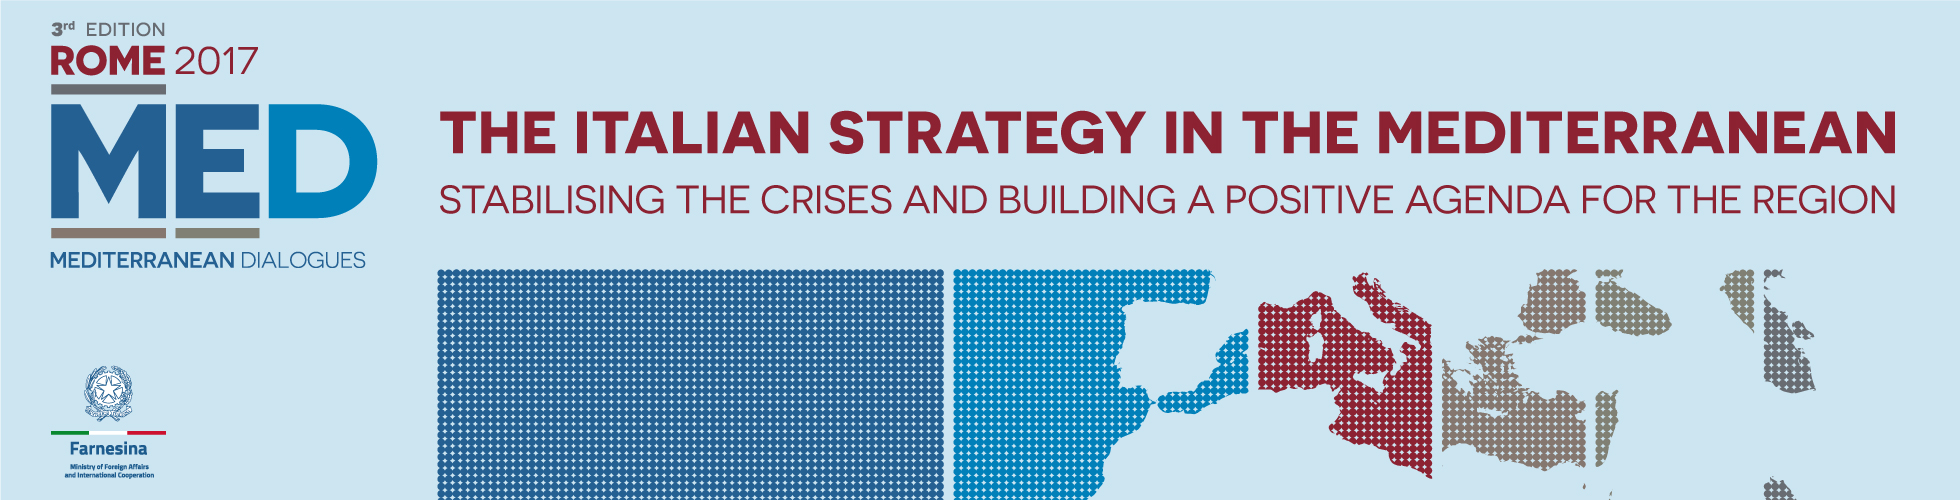 THE ITALIAN STRATEGY IN THE MEDITERRANEAN: Stabilising the Crises and Building a Positive Agenda for the Region